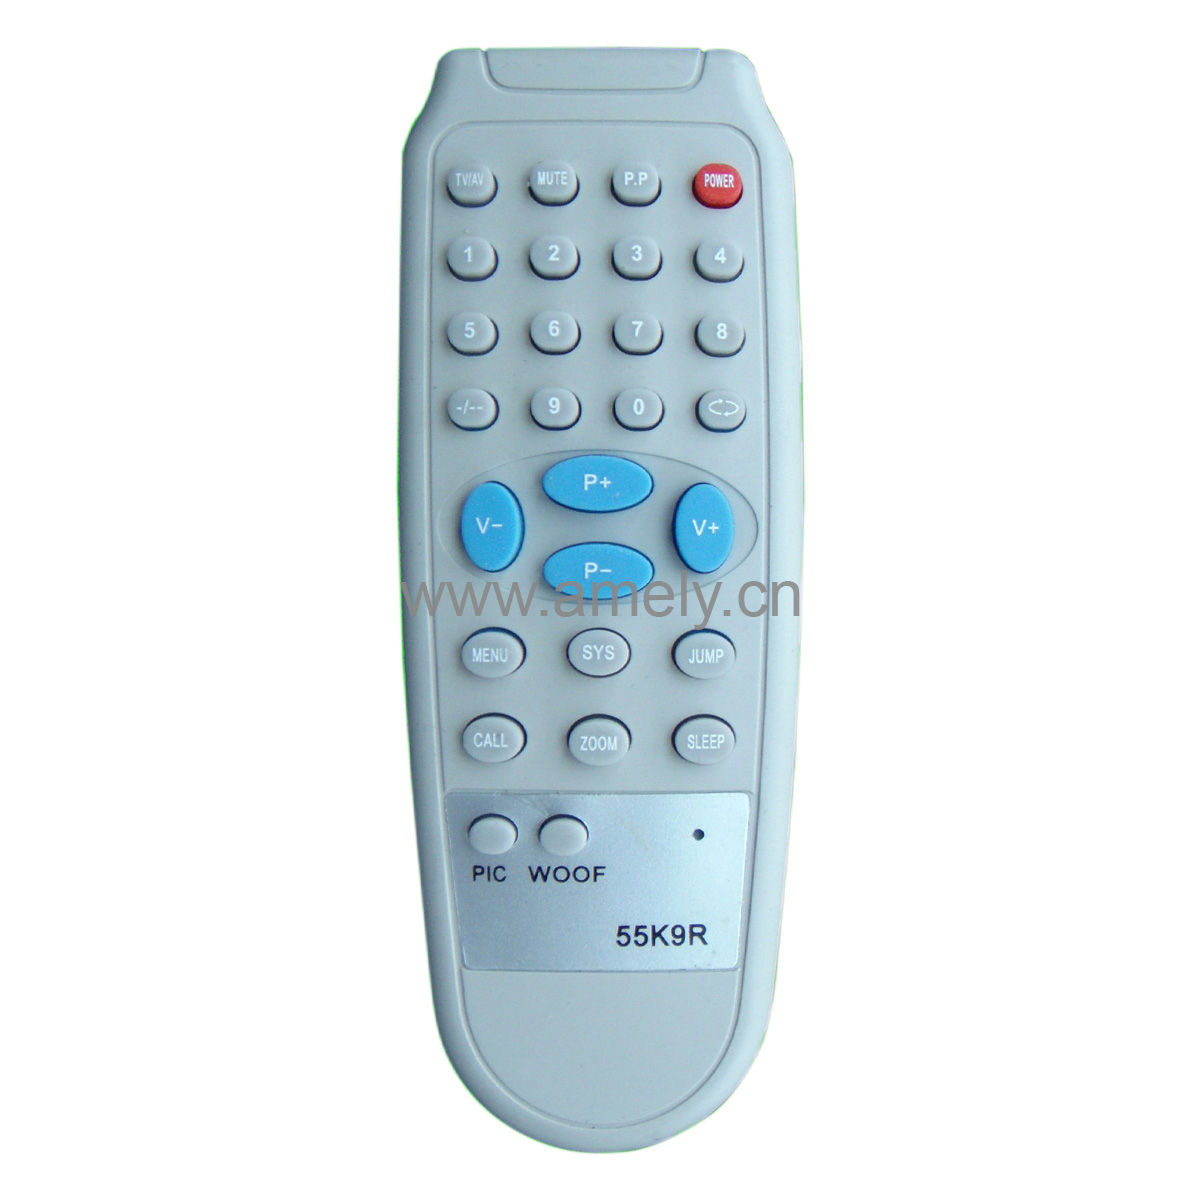 pilot Sociology bribe Reviews : 55K9R Use for CHINESE TV remote control - m.amely.cn